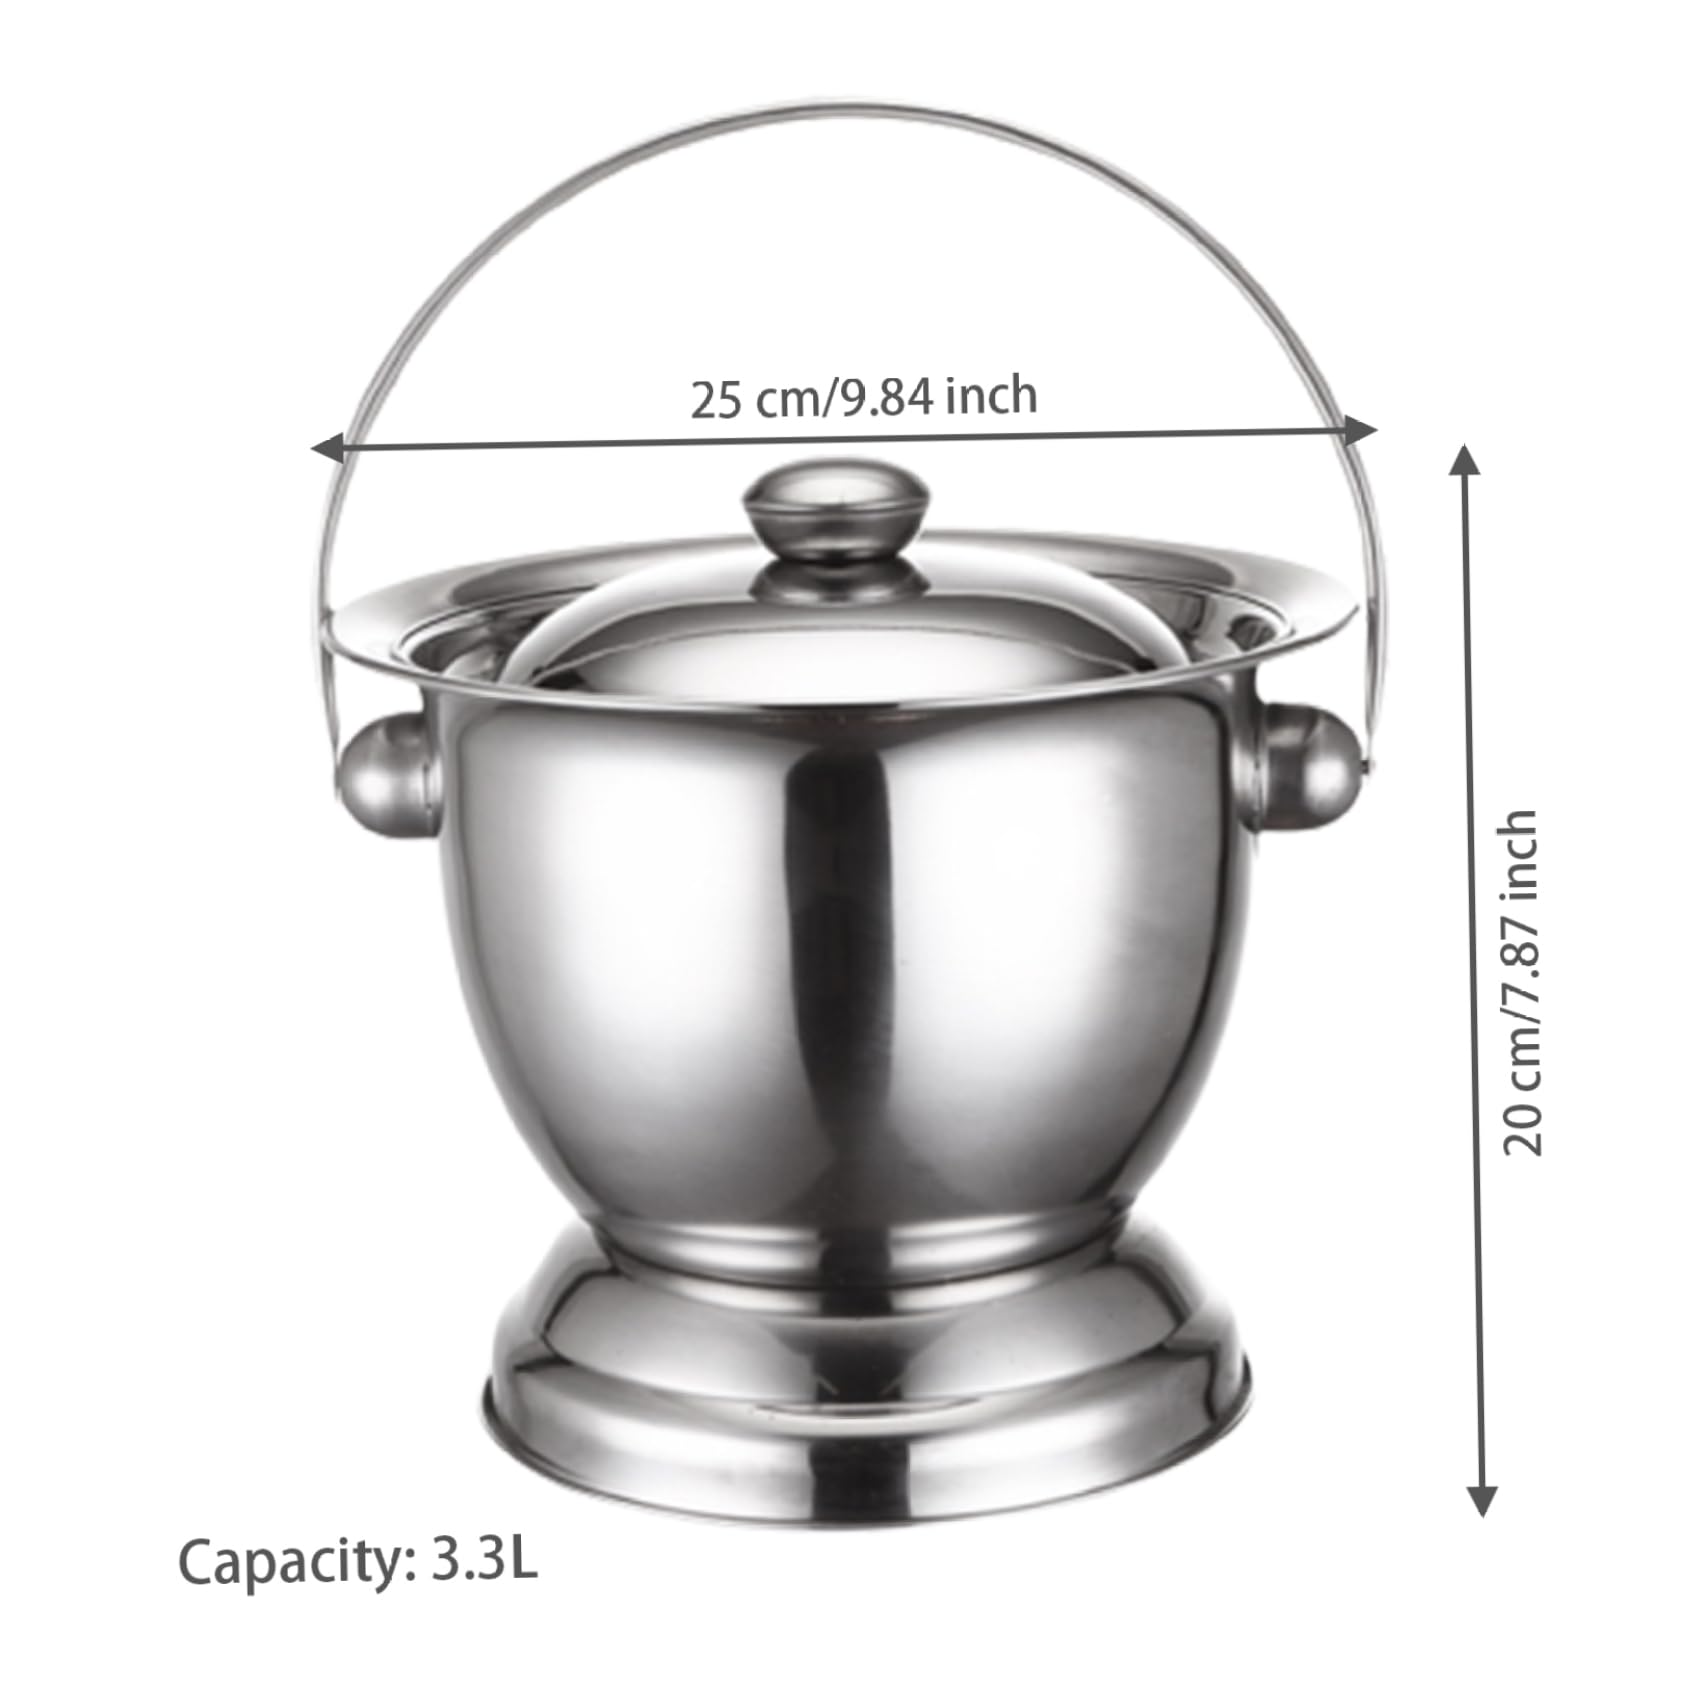 1PC Chamber Pot with Lid 3.3L Stainless Steel Bedside Commode Bucket Potable Spittoon Metal Bedpan Urine Pots for Kids Adults Elder Patient Home Camping Car Travel